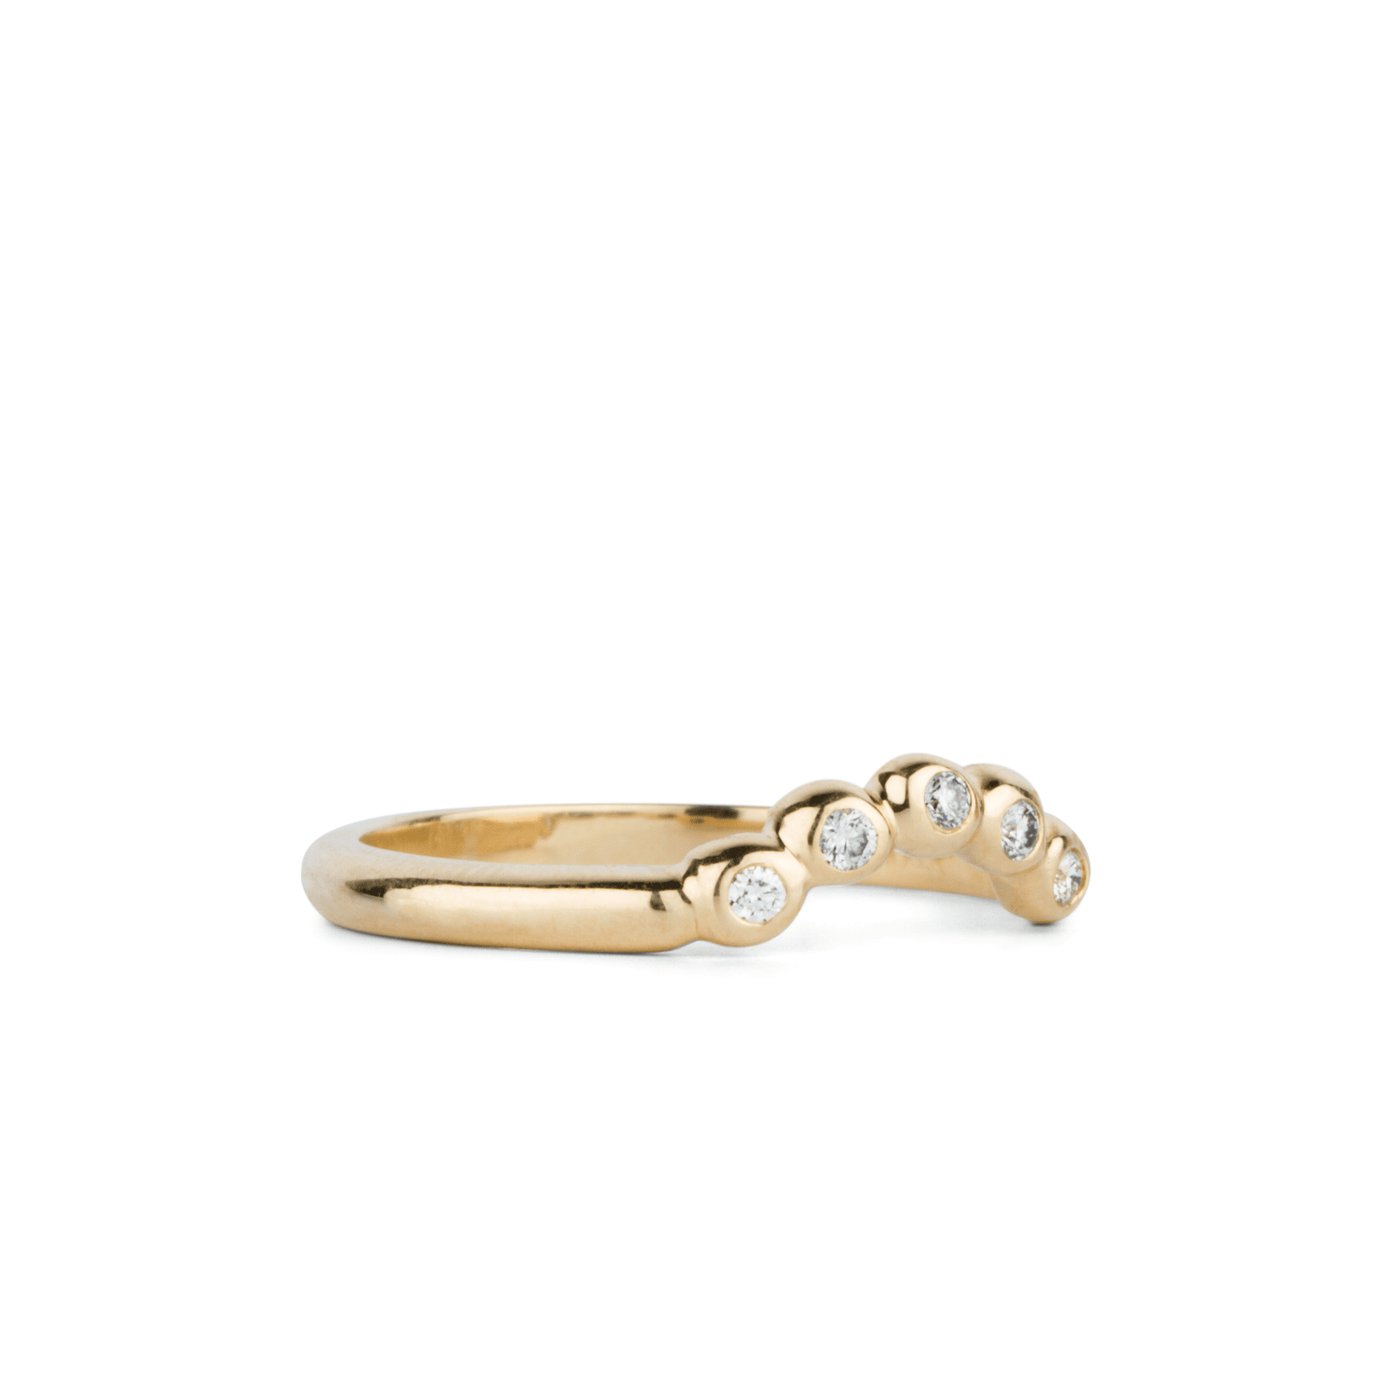 Arched Droplet Band in Yellow Gold with White Diamonds side view #2 on a white background by Corey Egan